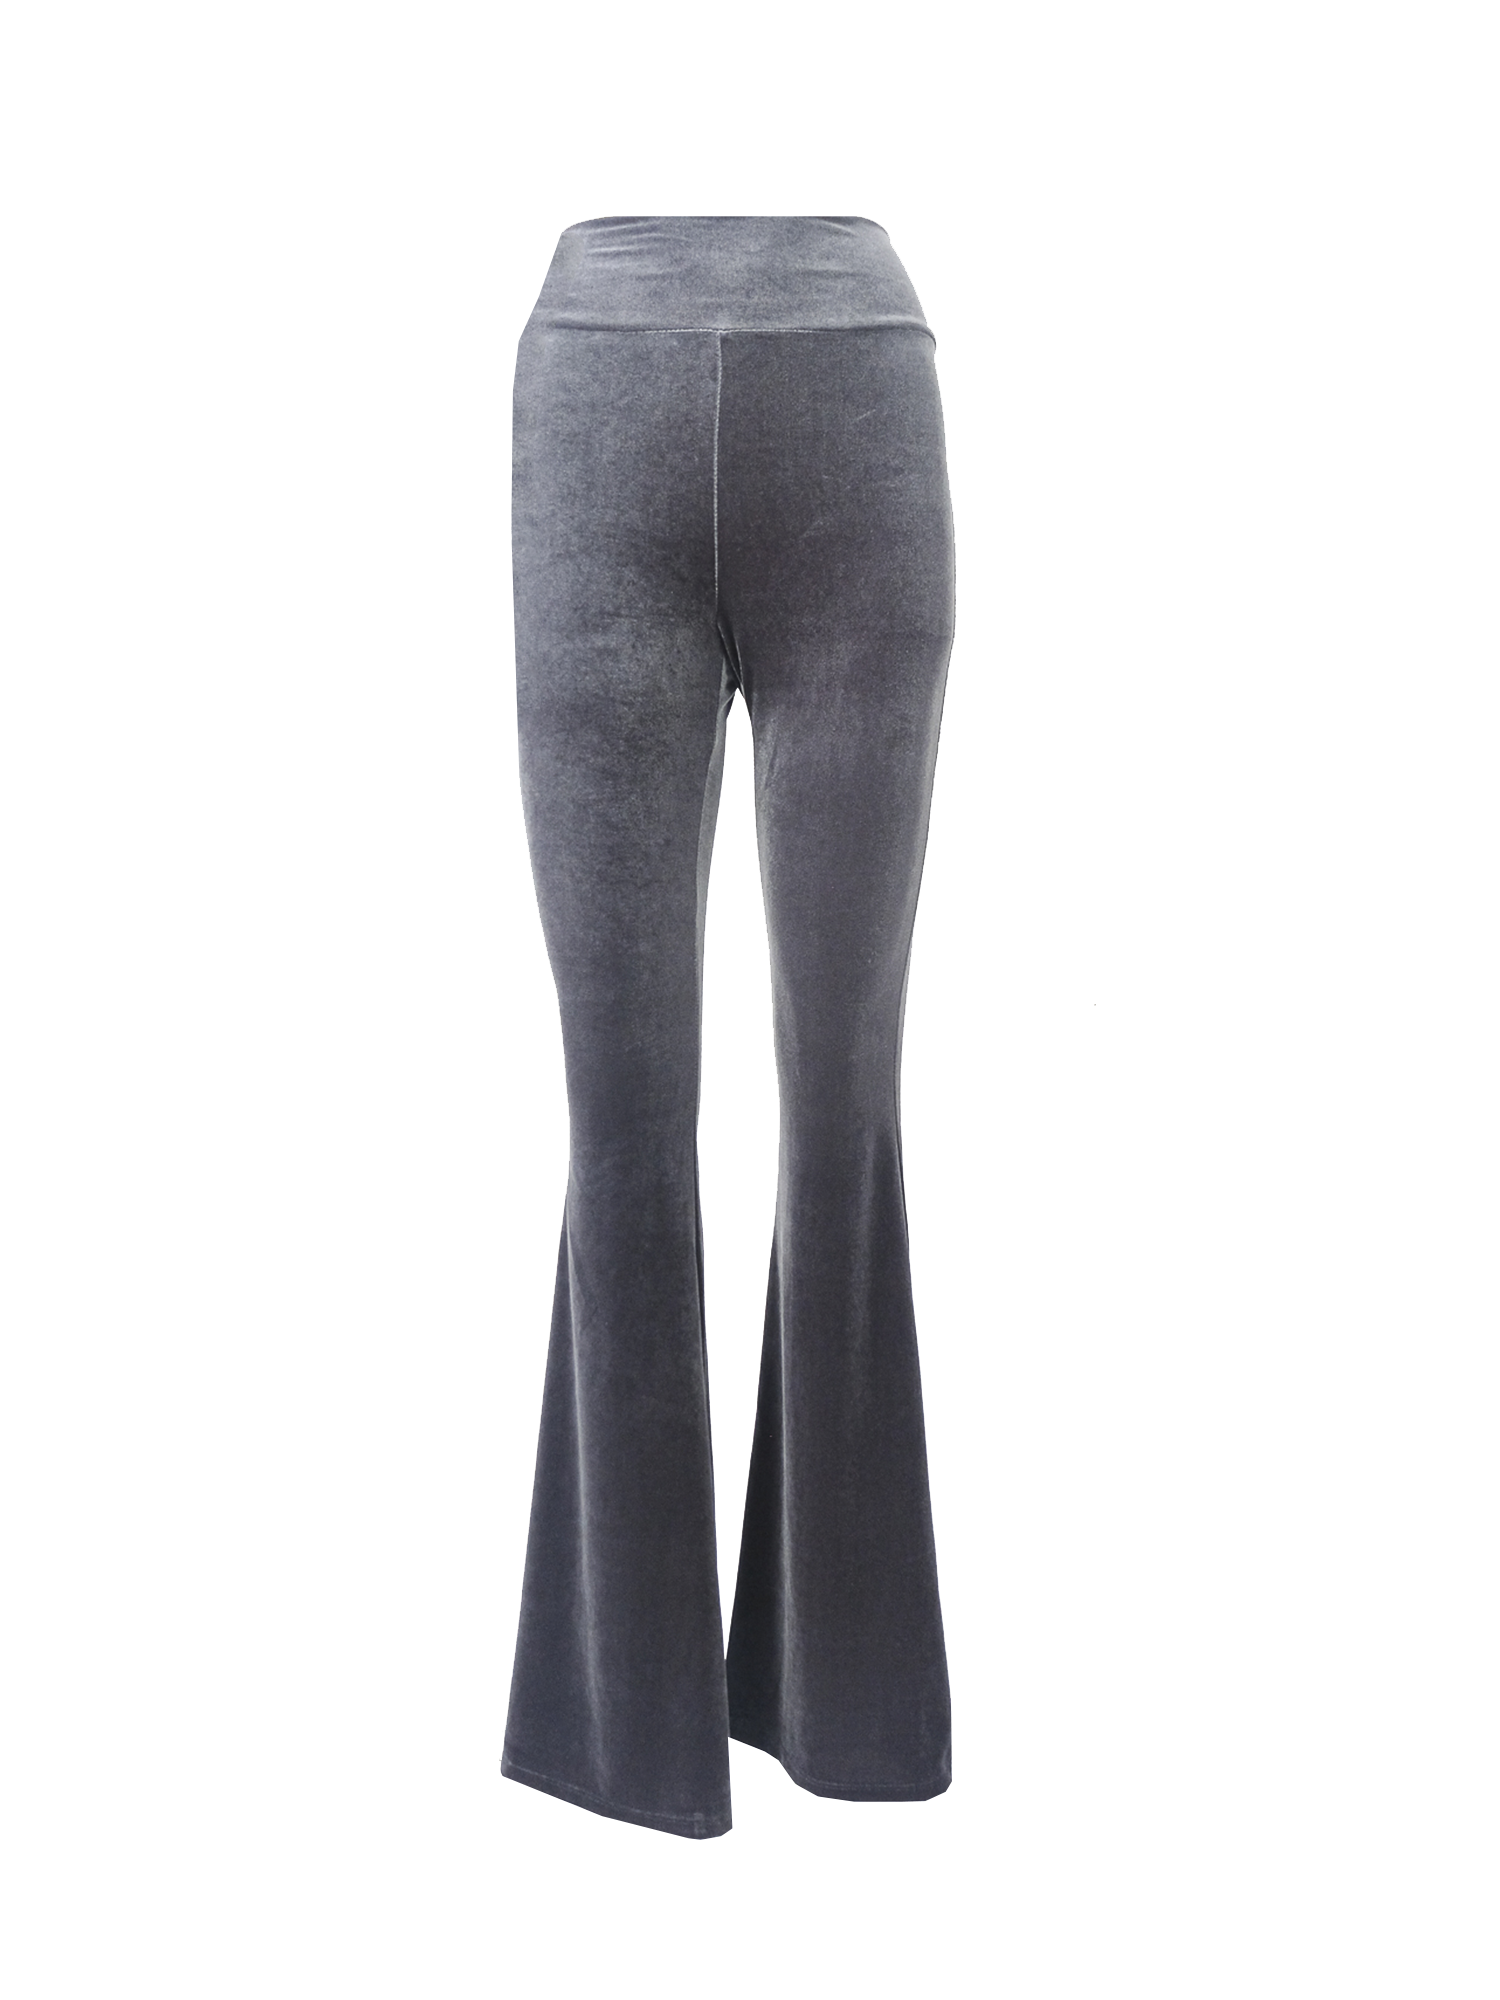 LOLA - flared pants in gray chenille